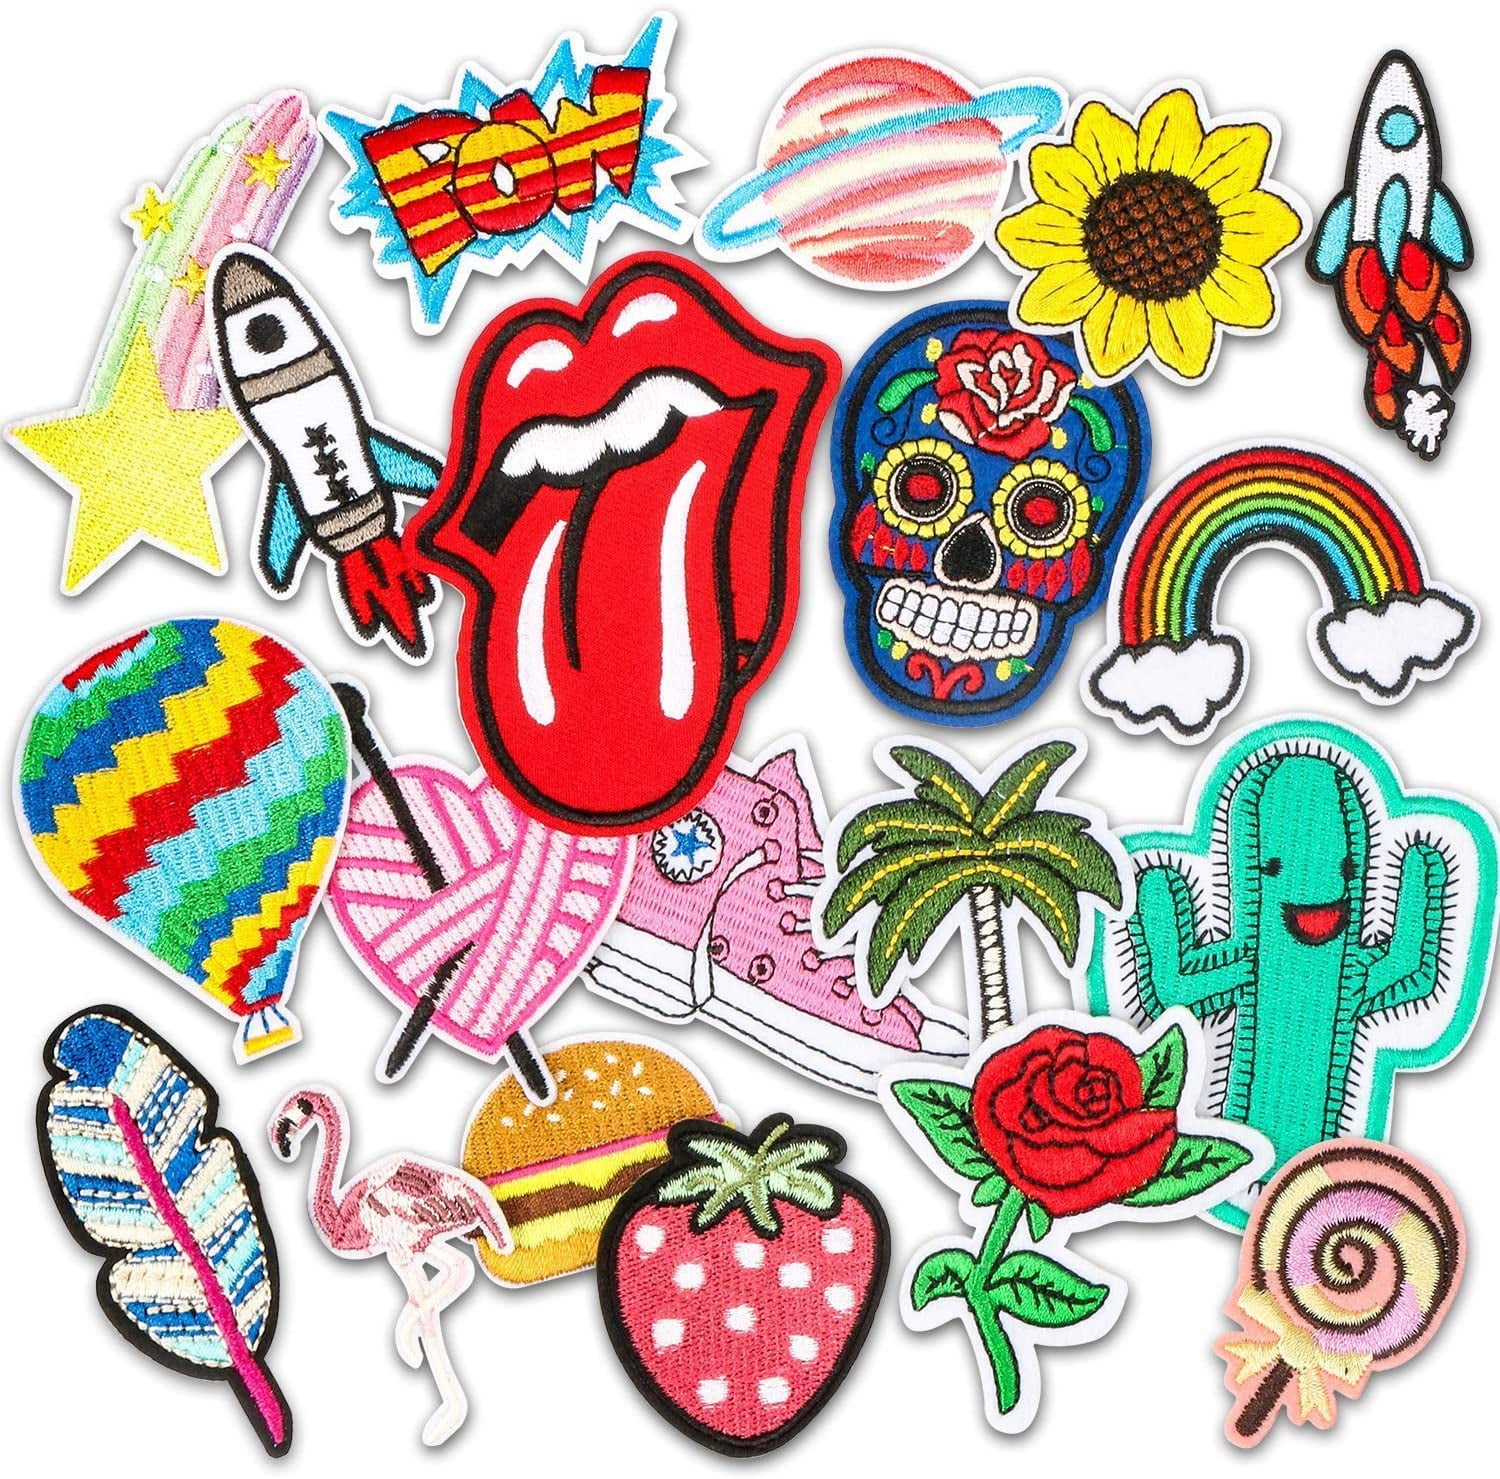 10 Pcs Cookie Embroidered Iron On Patches, Cute Cookie Appliques